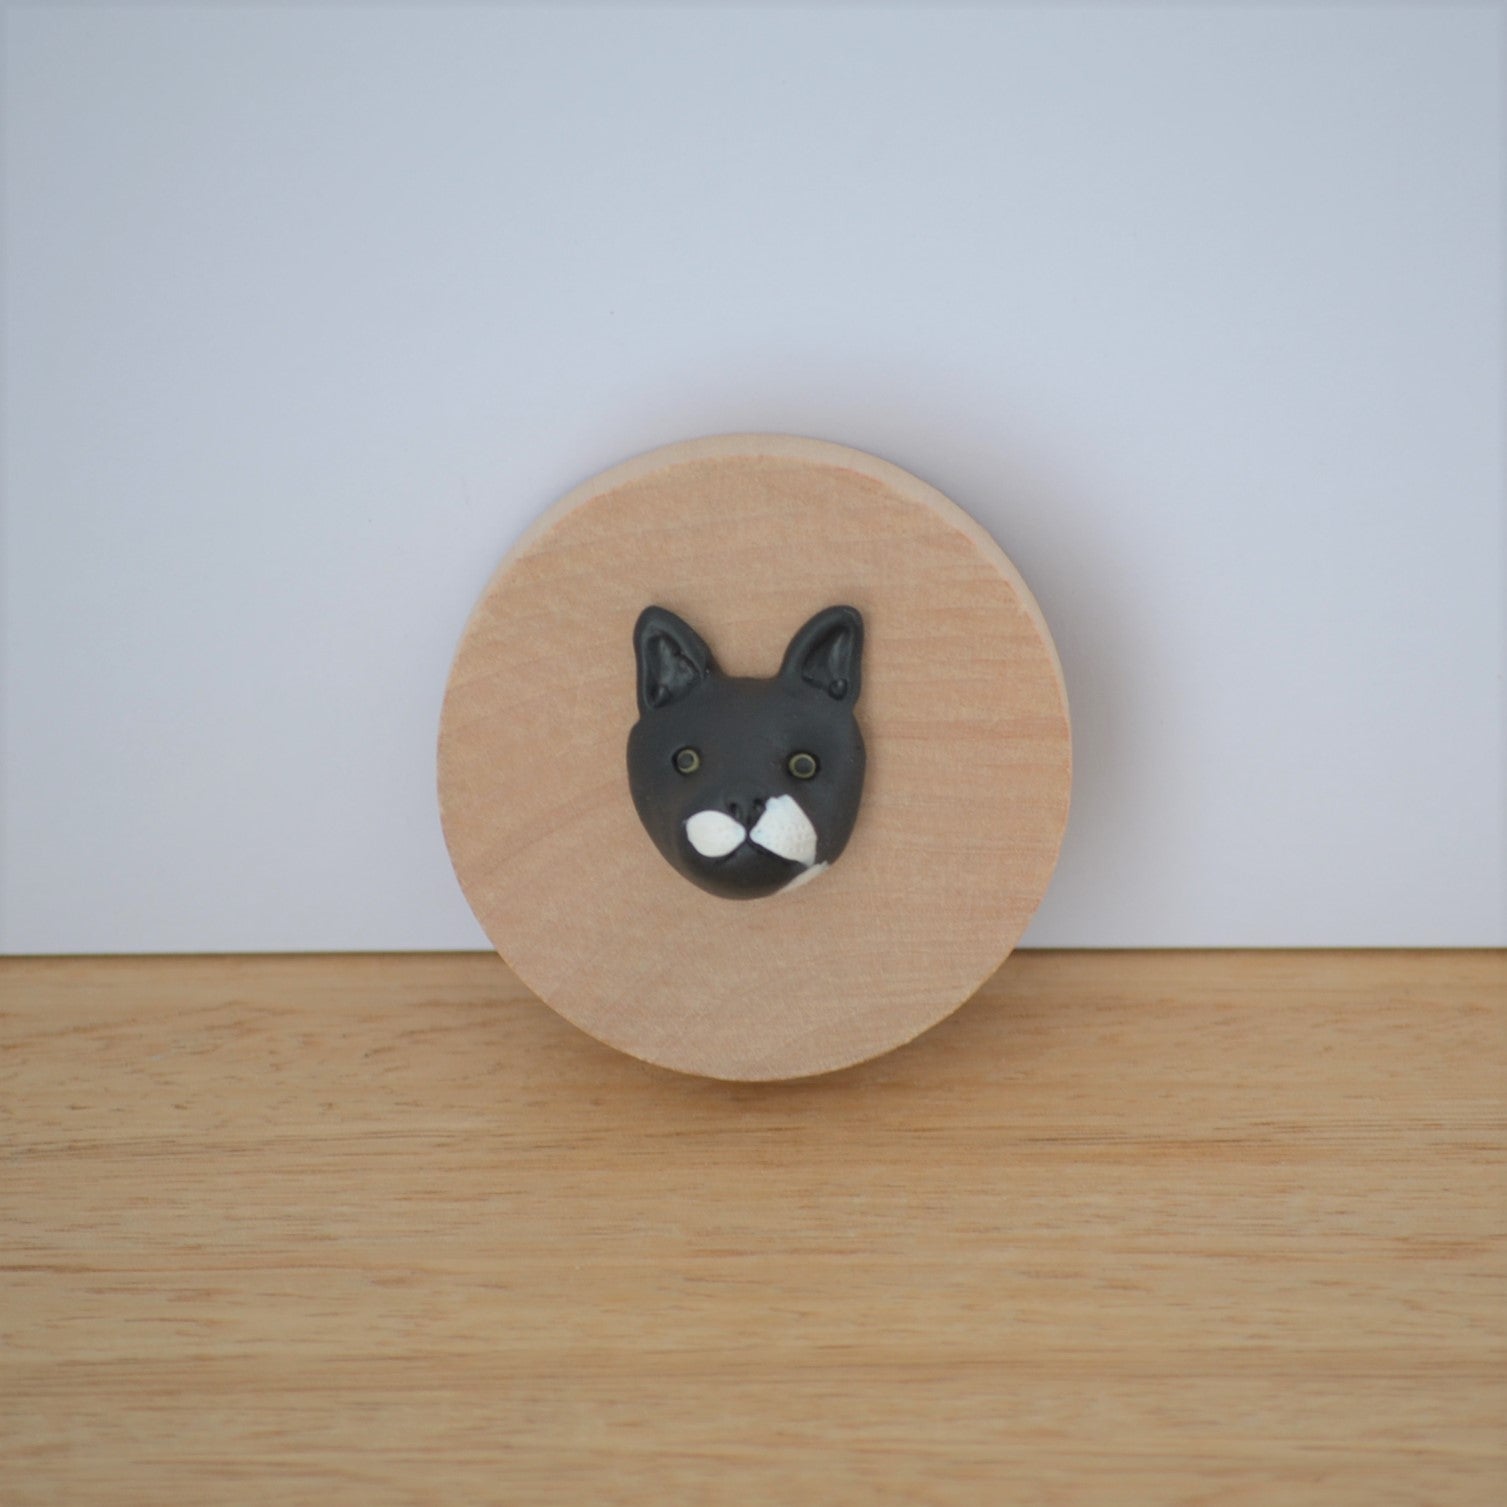 Bottle opener with custom black cat face sculpture attached